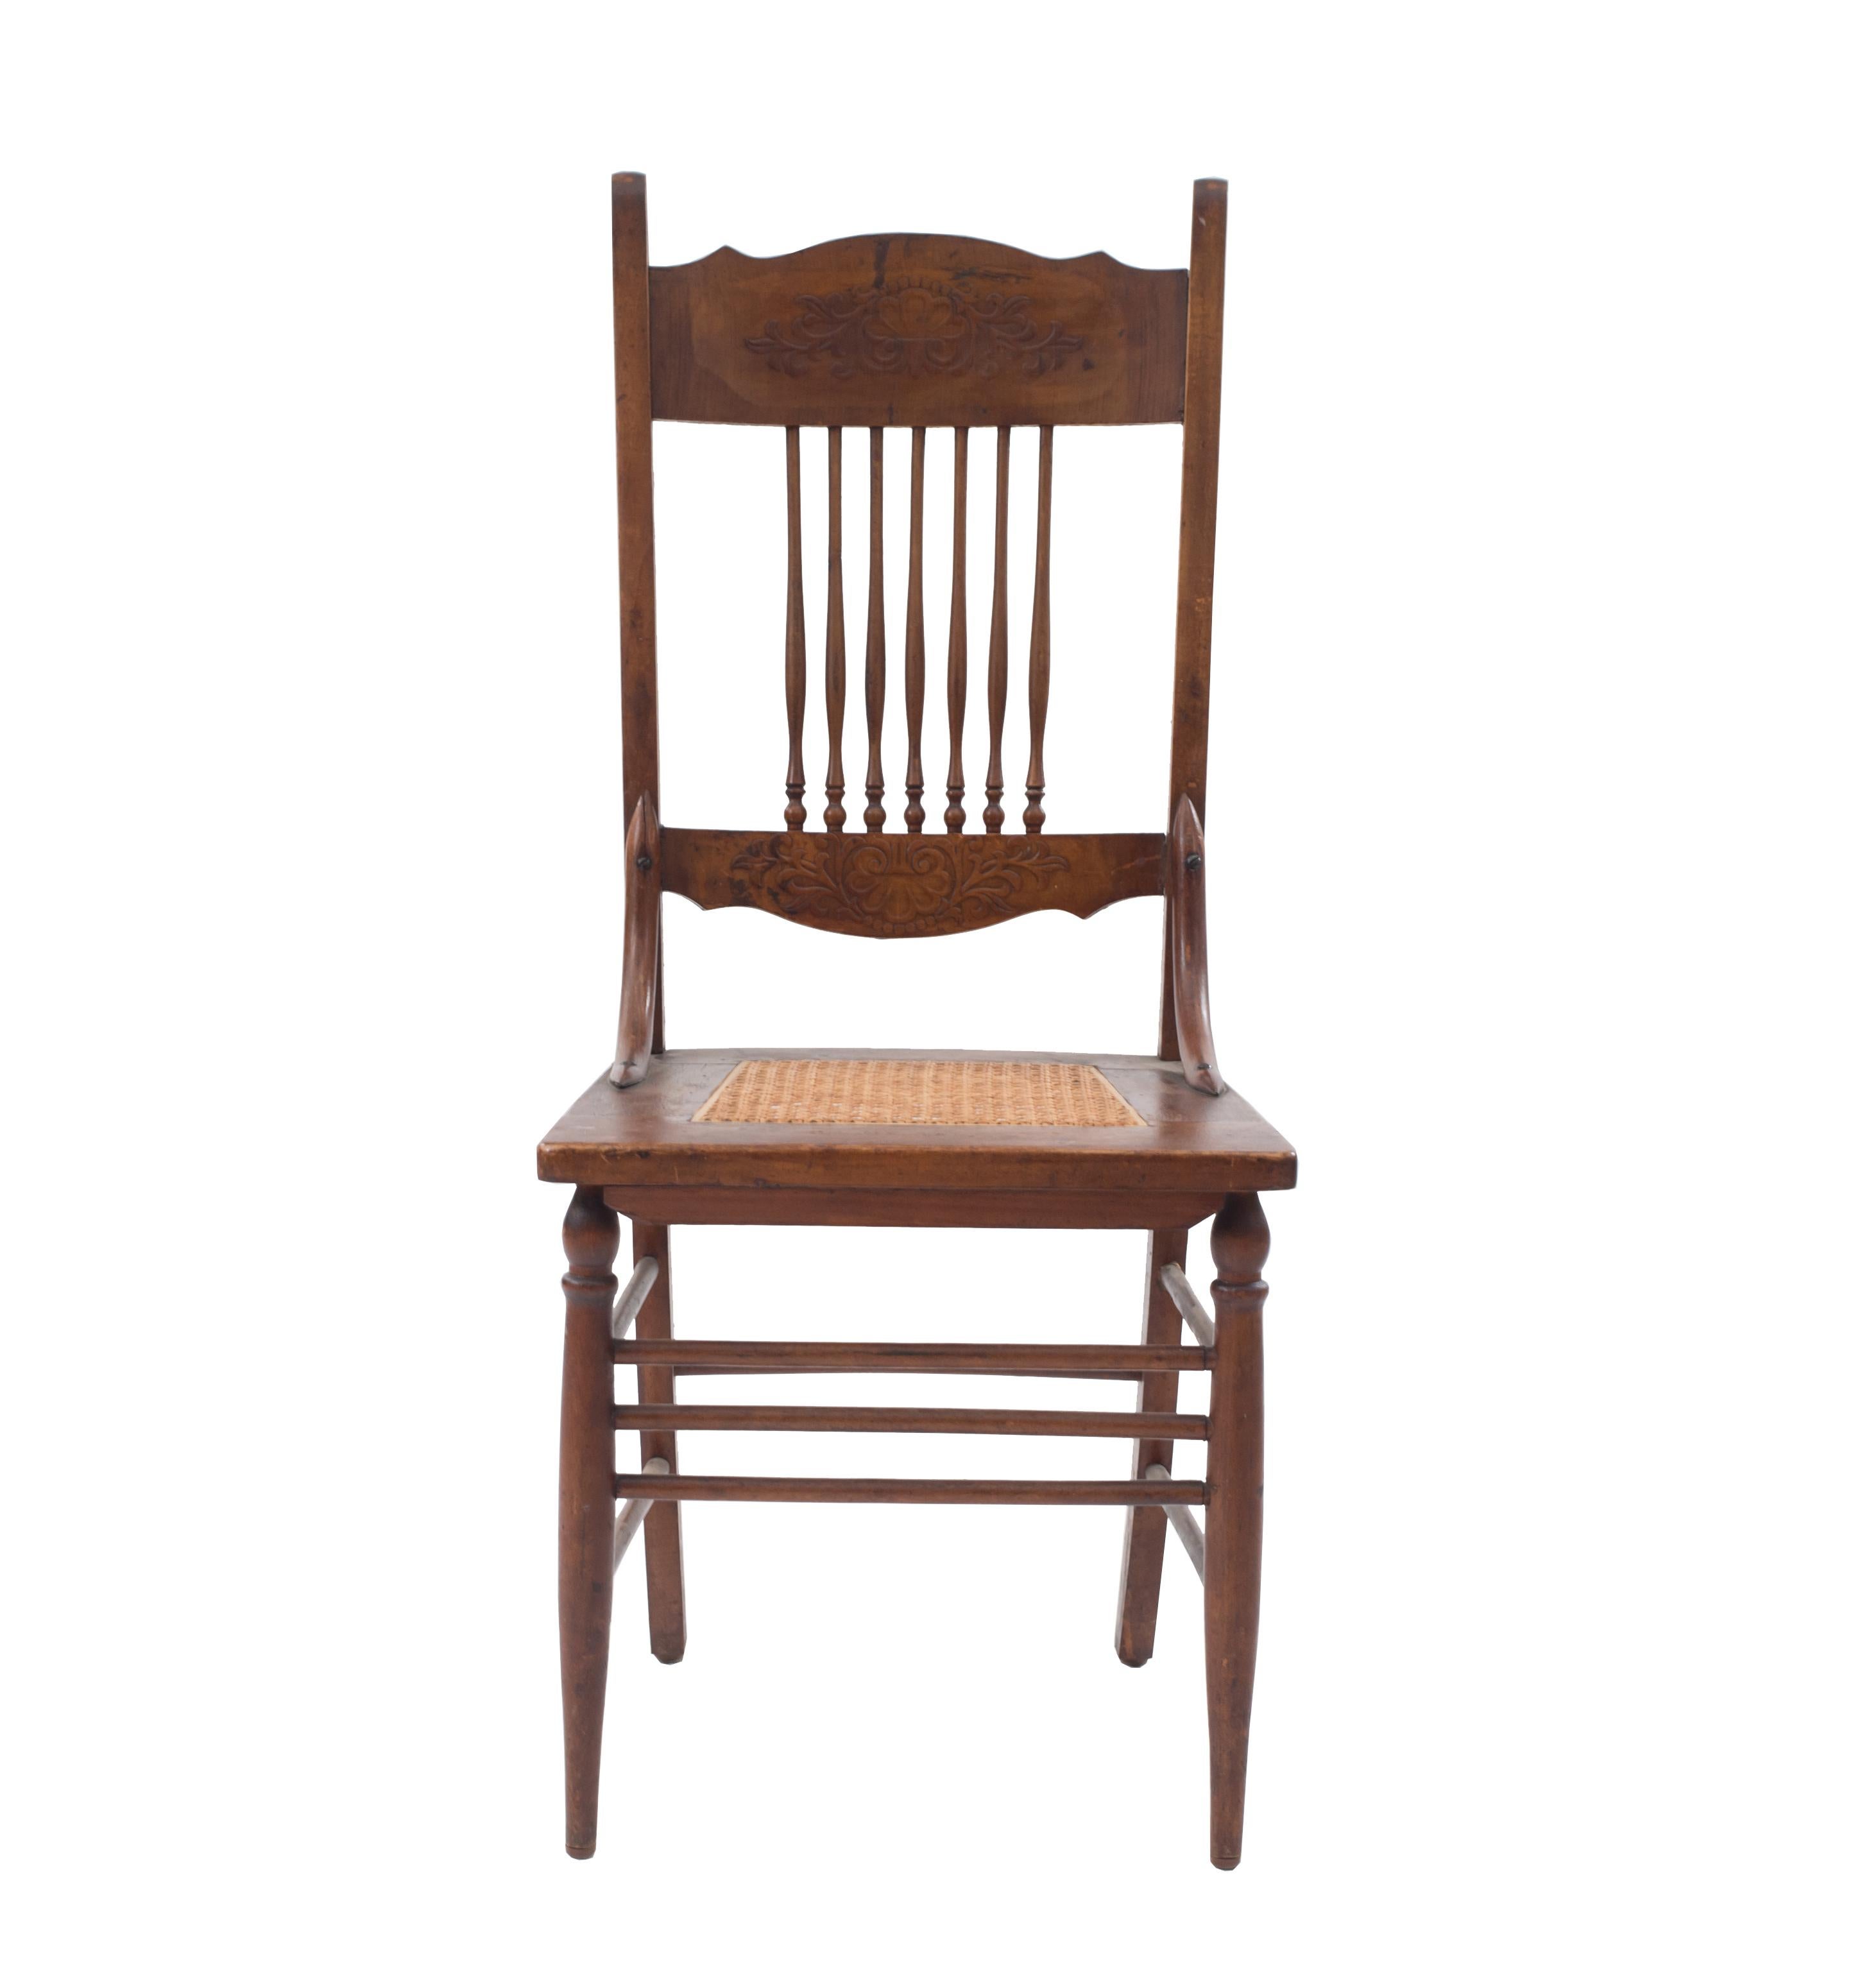 Set of 6 American Victorian (19th-20th century) golden oak pressed and spindle back side chairs (part of an 8-piece dining room suite including a cabinet-062033 and dining table-062031).